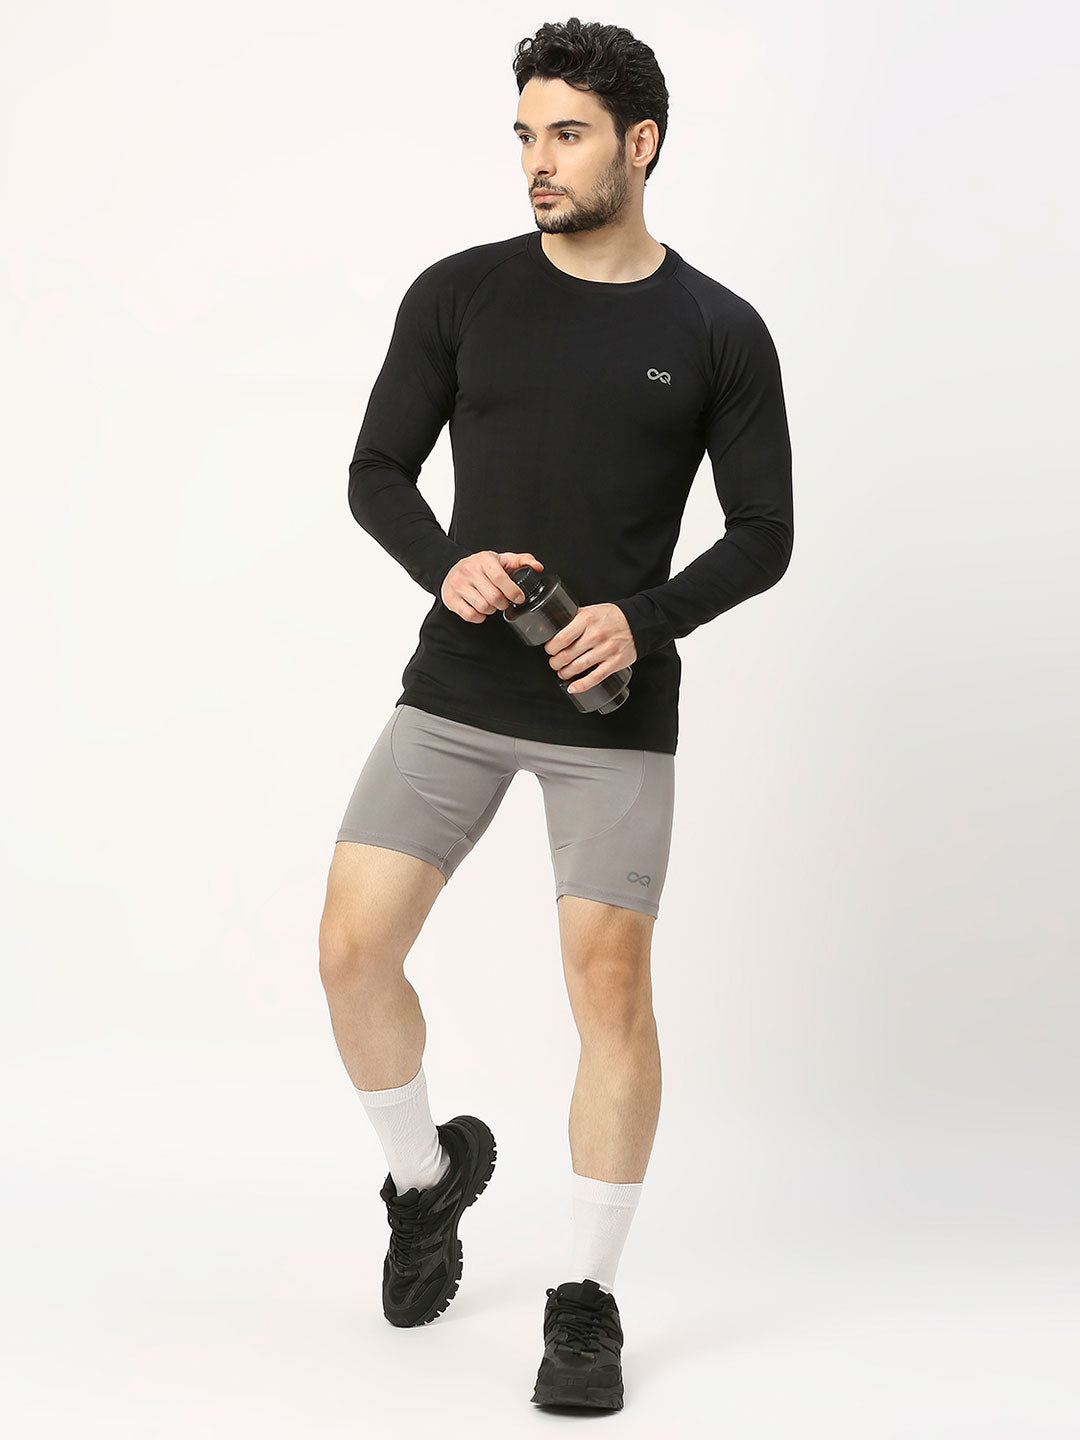 Shop Men's Grey Compression Shorts - Optimal Support and Performance